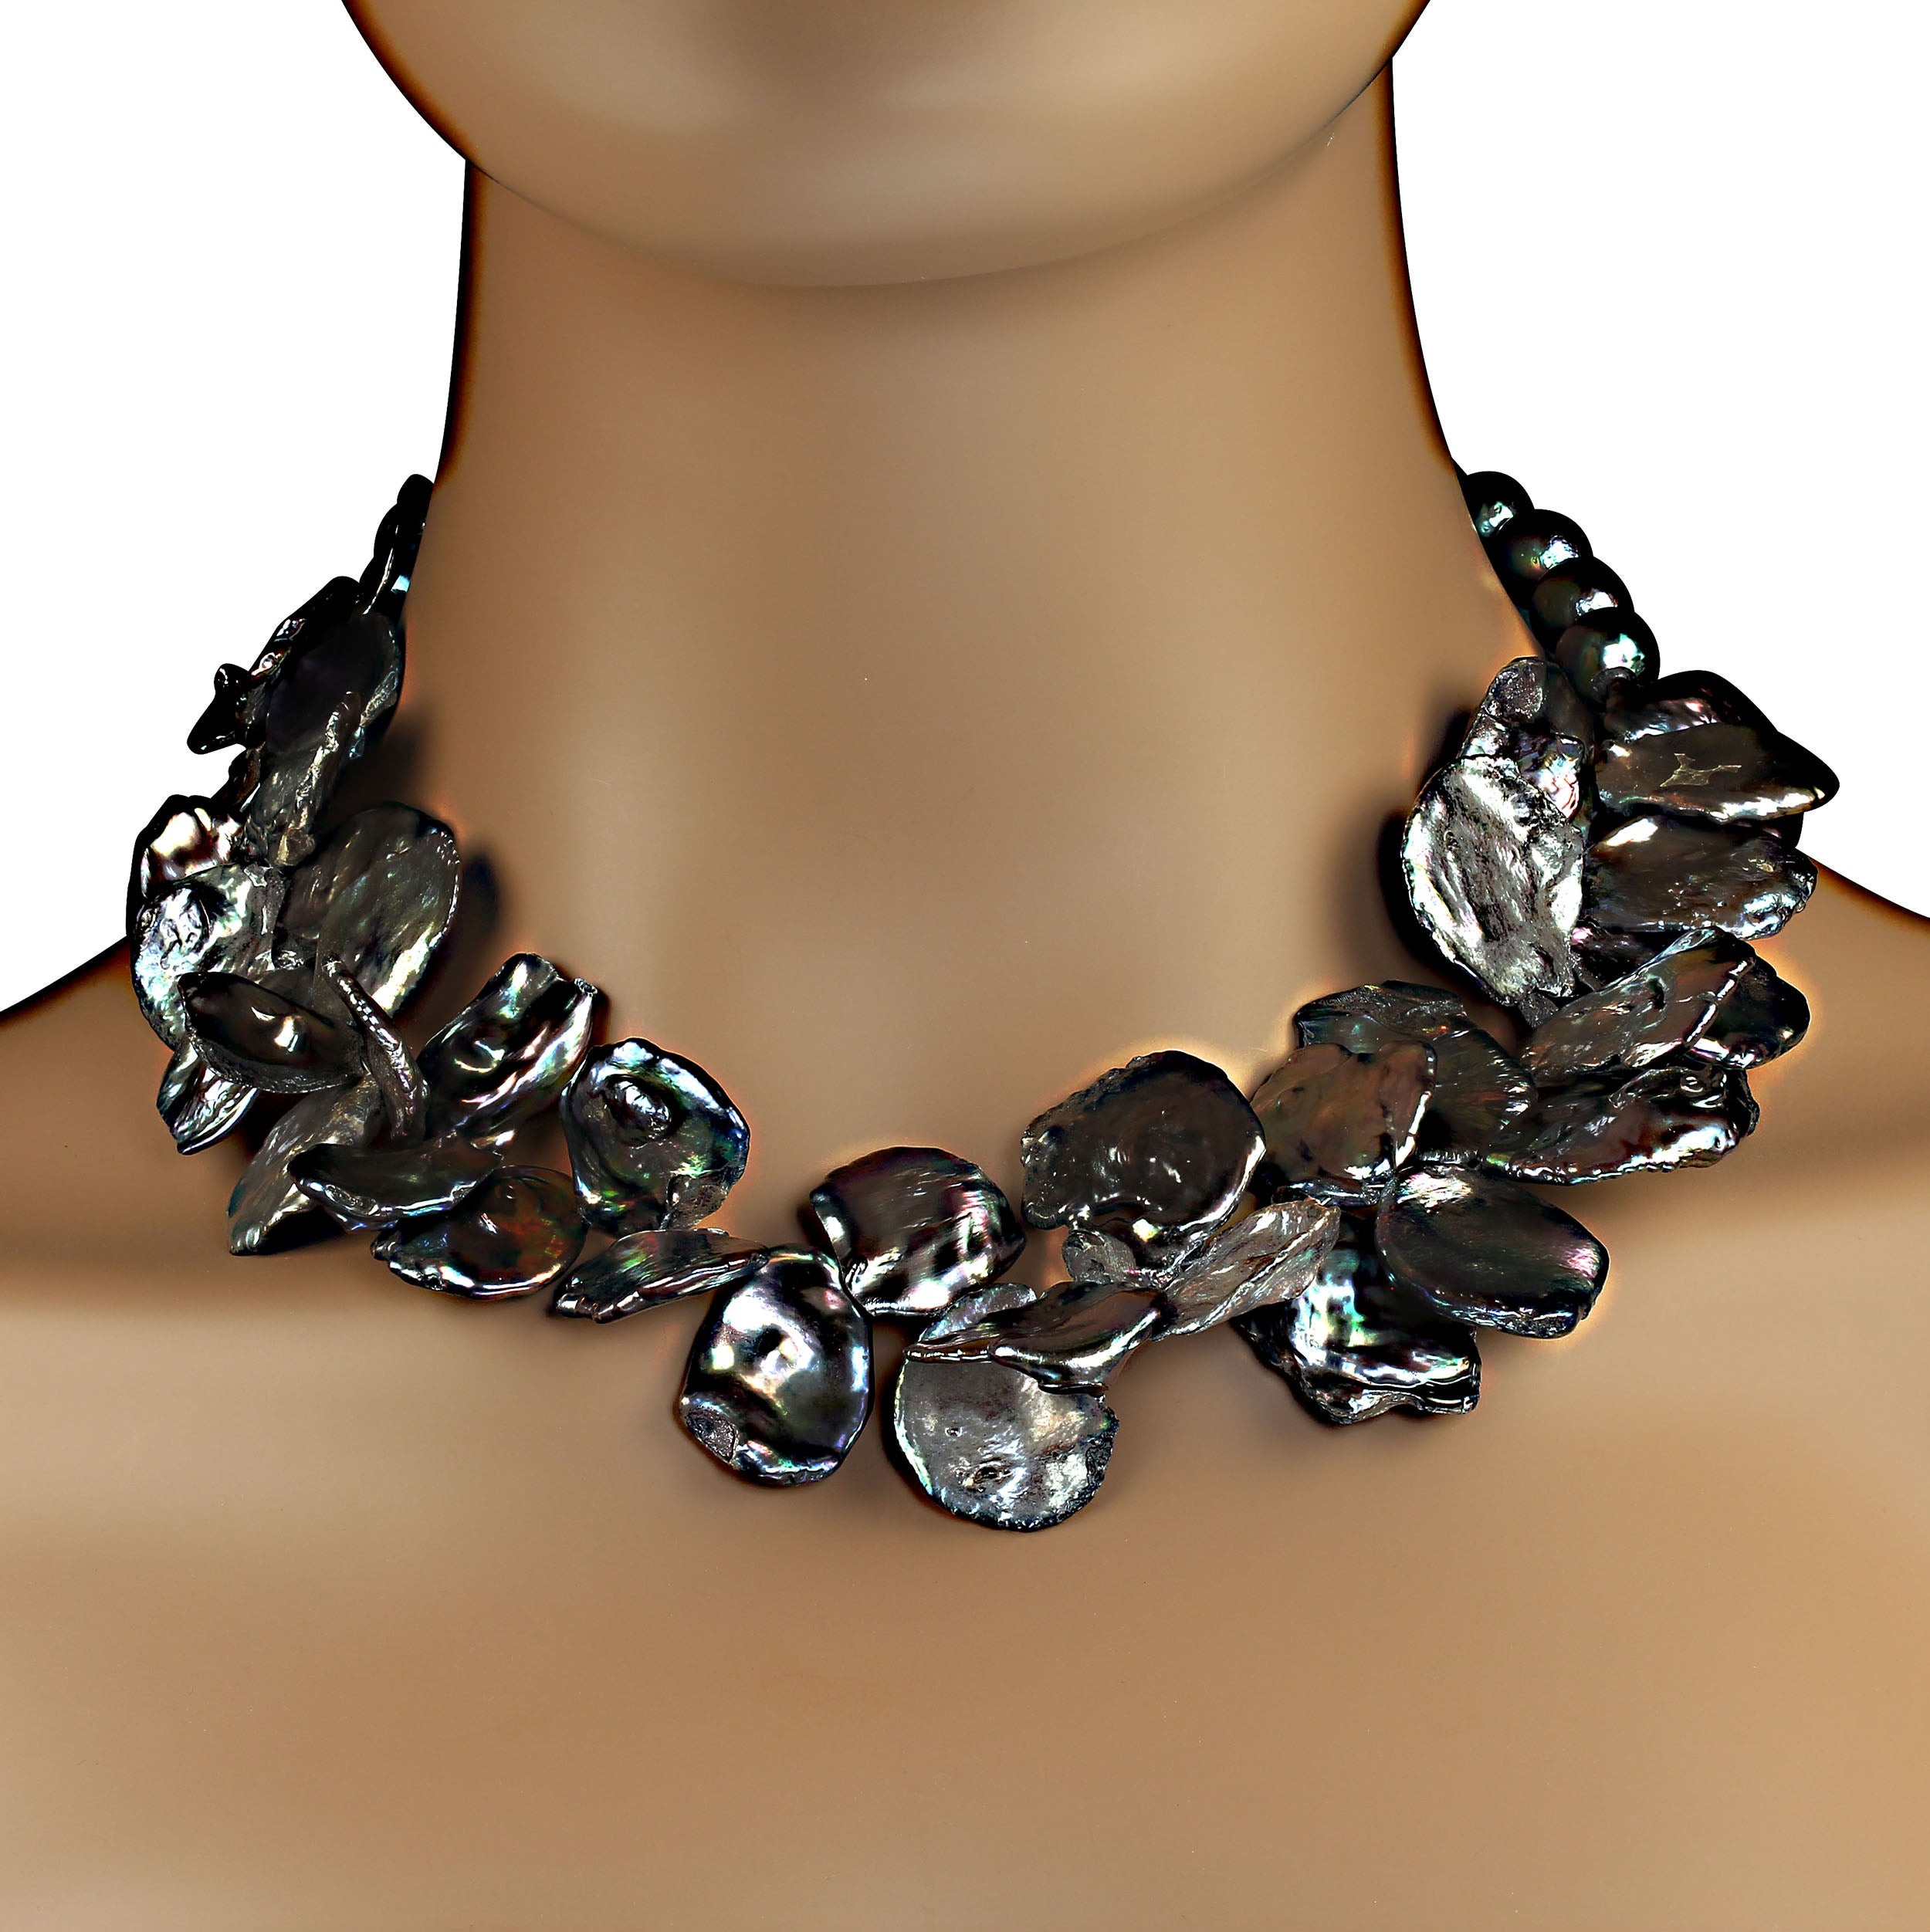 AJD Iridescent Peacock Pearl Petals necklace 17 Inches  Great Gift!